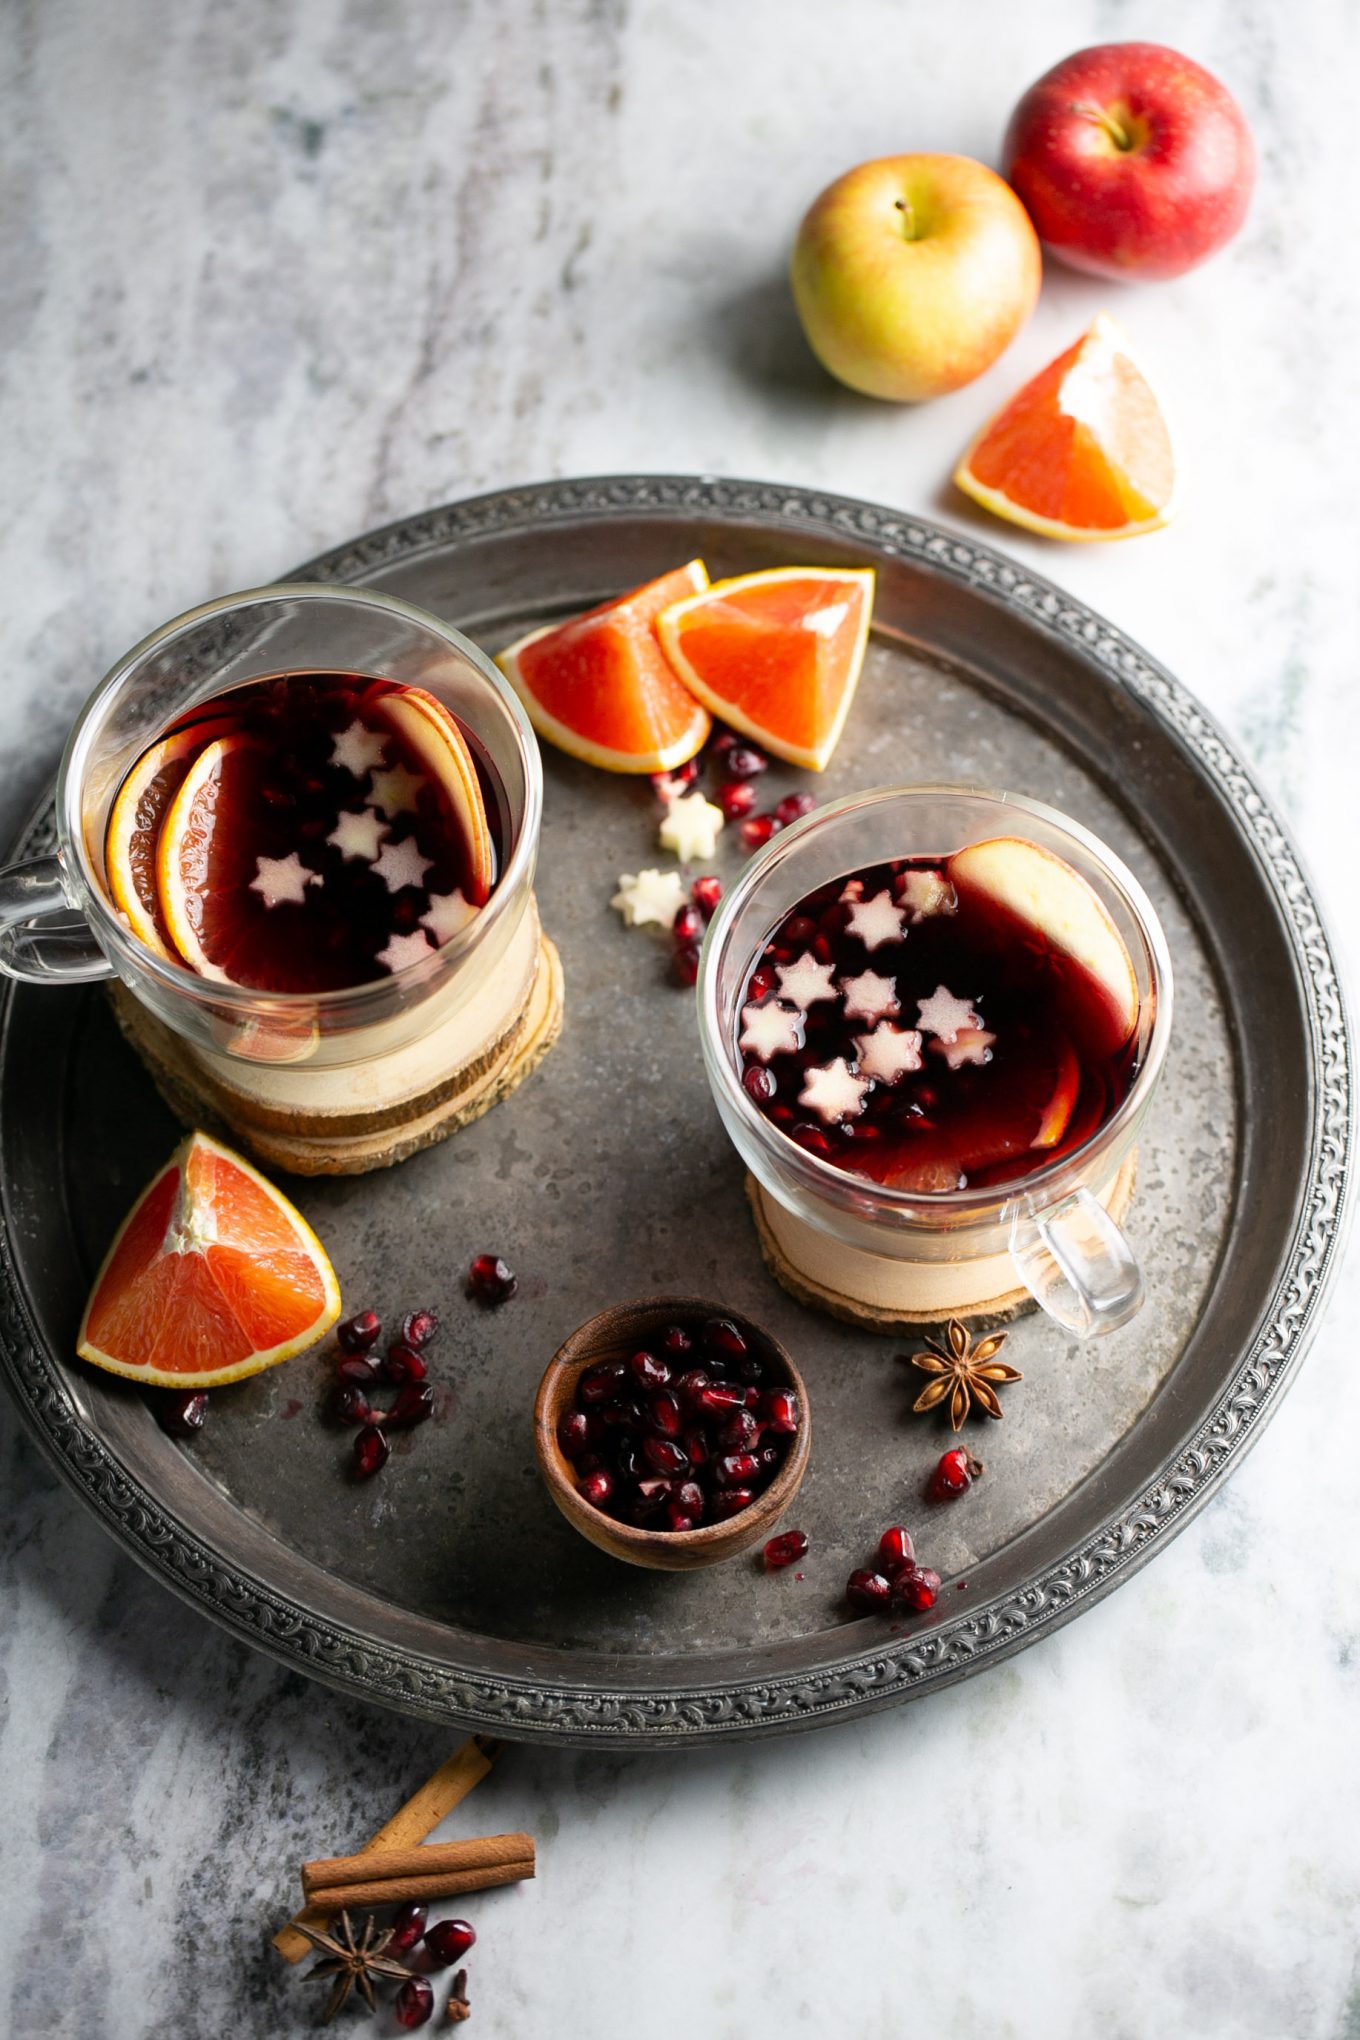 A festive drink made by simmering wine with warming spices like cinnamon and garnished with slices of oranges.